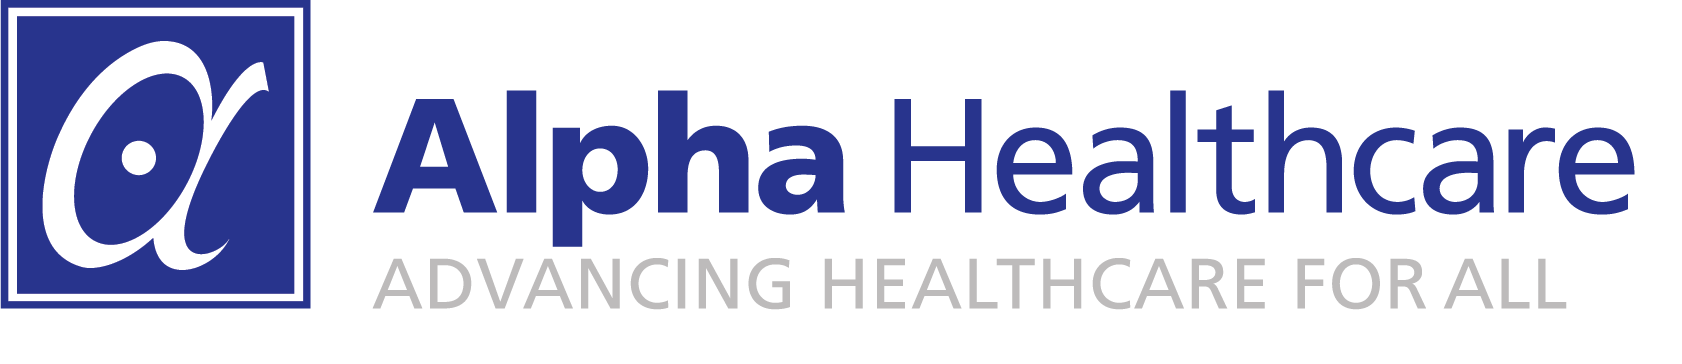 Alpha Healthcare: Advancing healthcare for all 